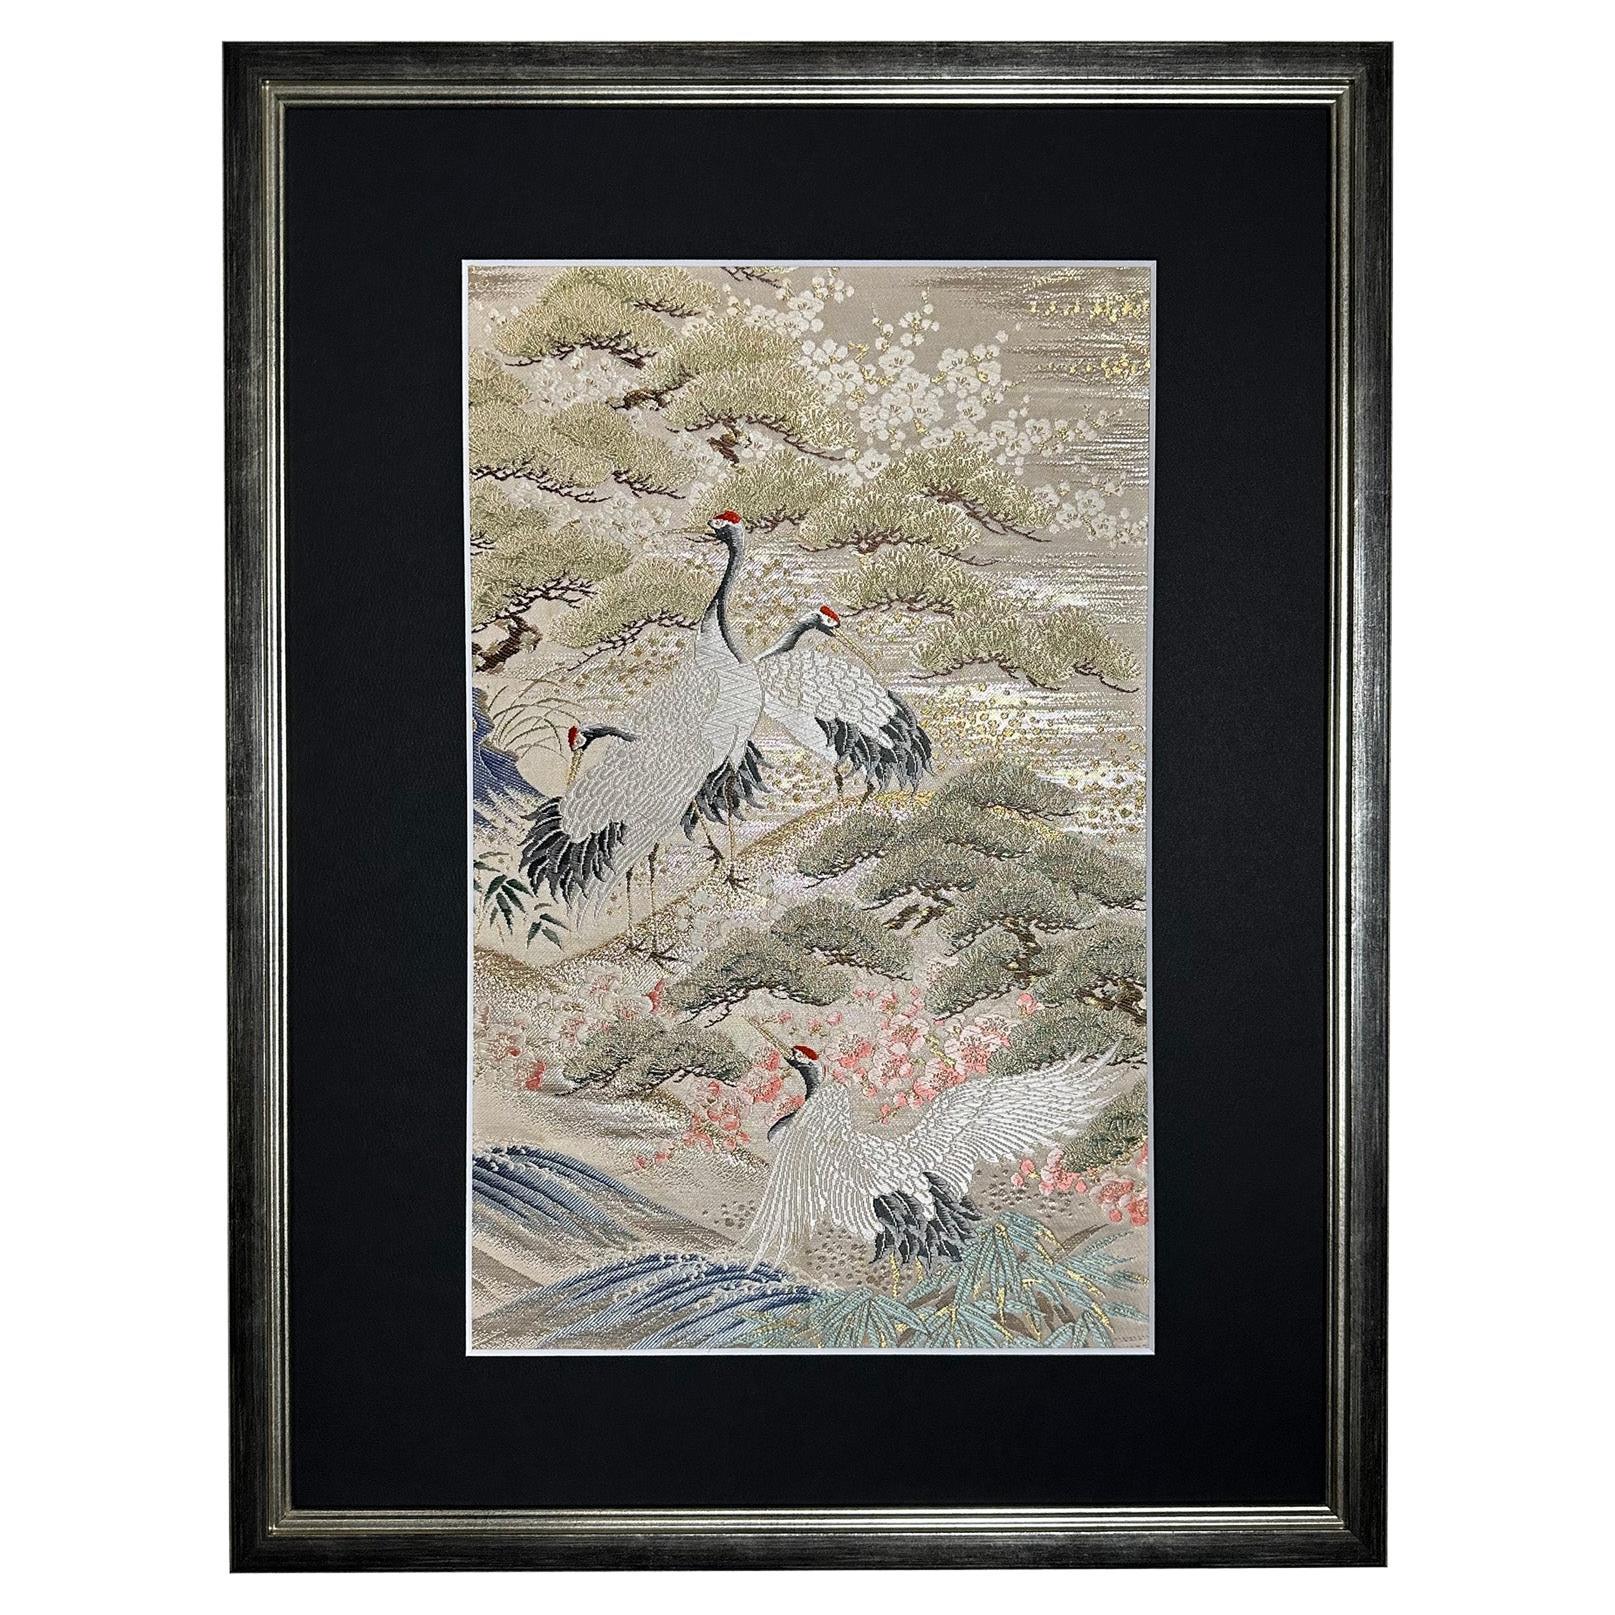 Framed Kimono Art, "The Crane's Departure" by Kimono-Couture, Japanese Wall Art For Sale